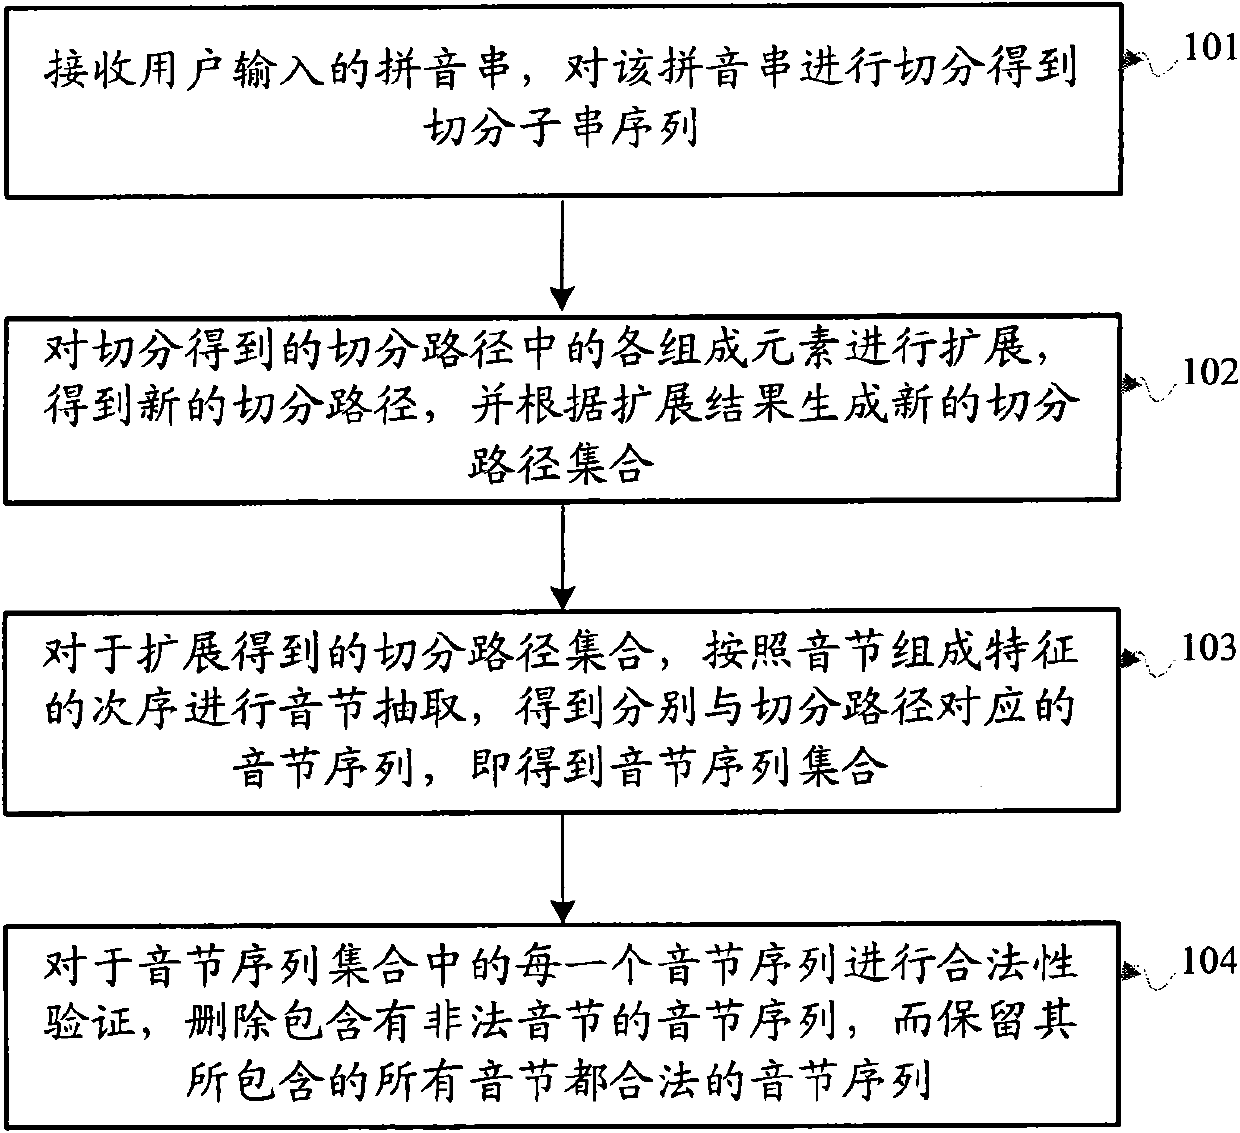 Method and system for processing pinyin string in process of inputting Chinese characters